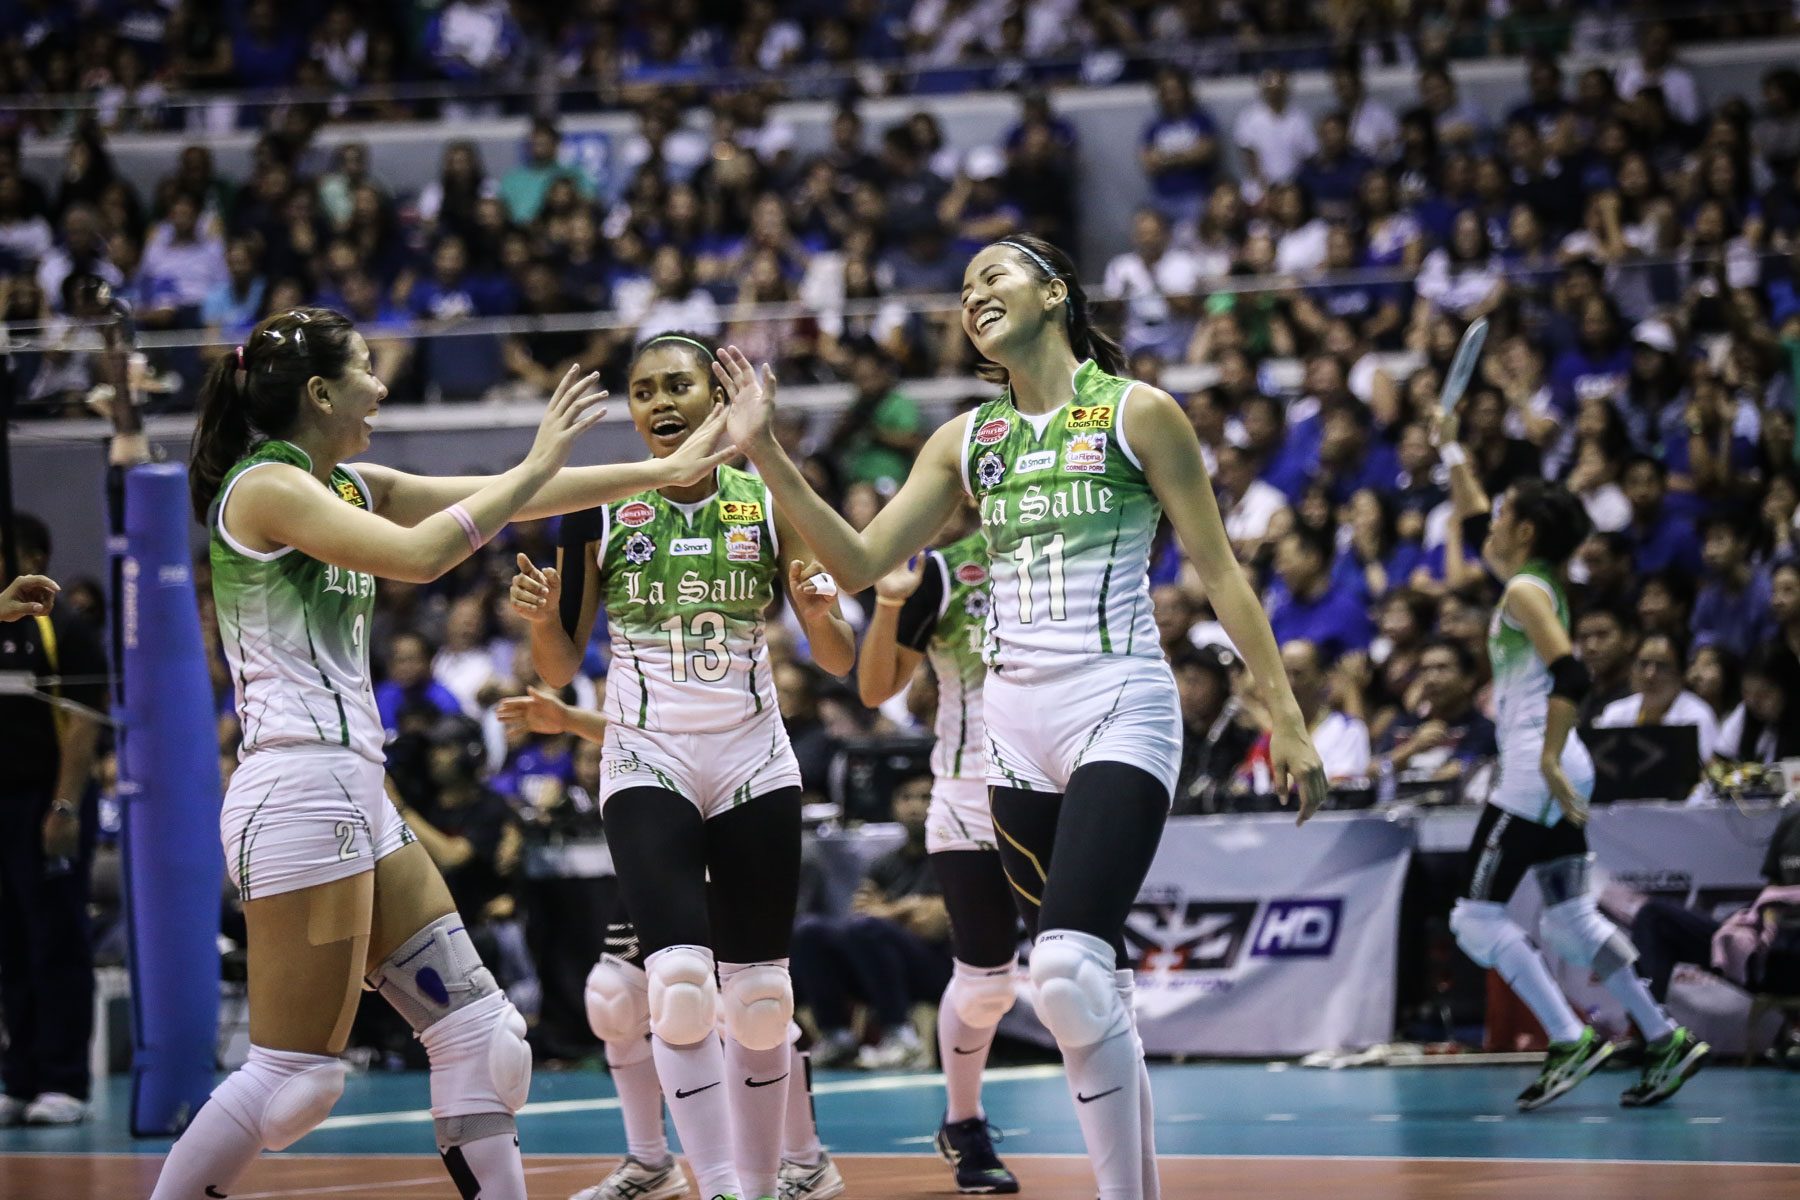 BACK-TO-BACK. The De La Salle Lady Spikers win the UAAP Season 79 women's volleyball title after sweeping the Ateneo Lady Eagles. Photo by Josh Albelda/Rappler 